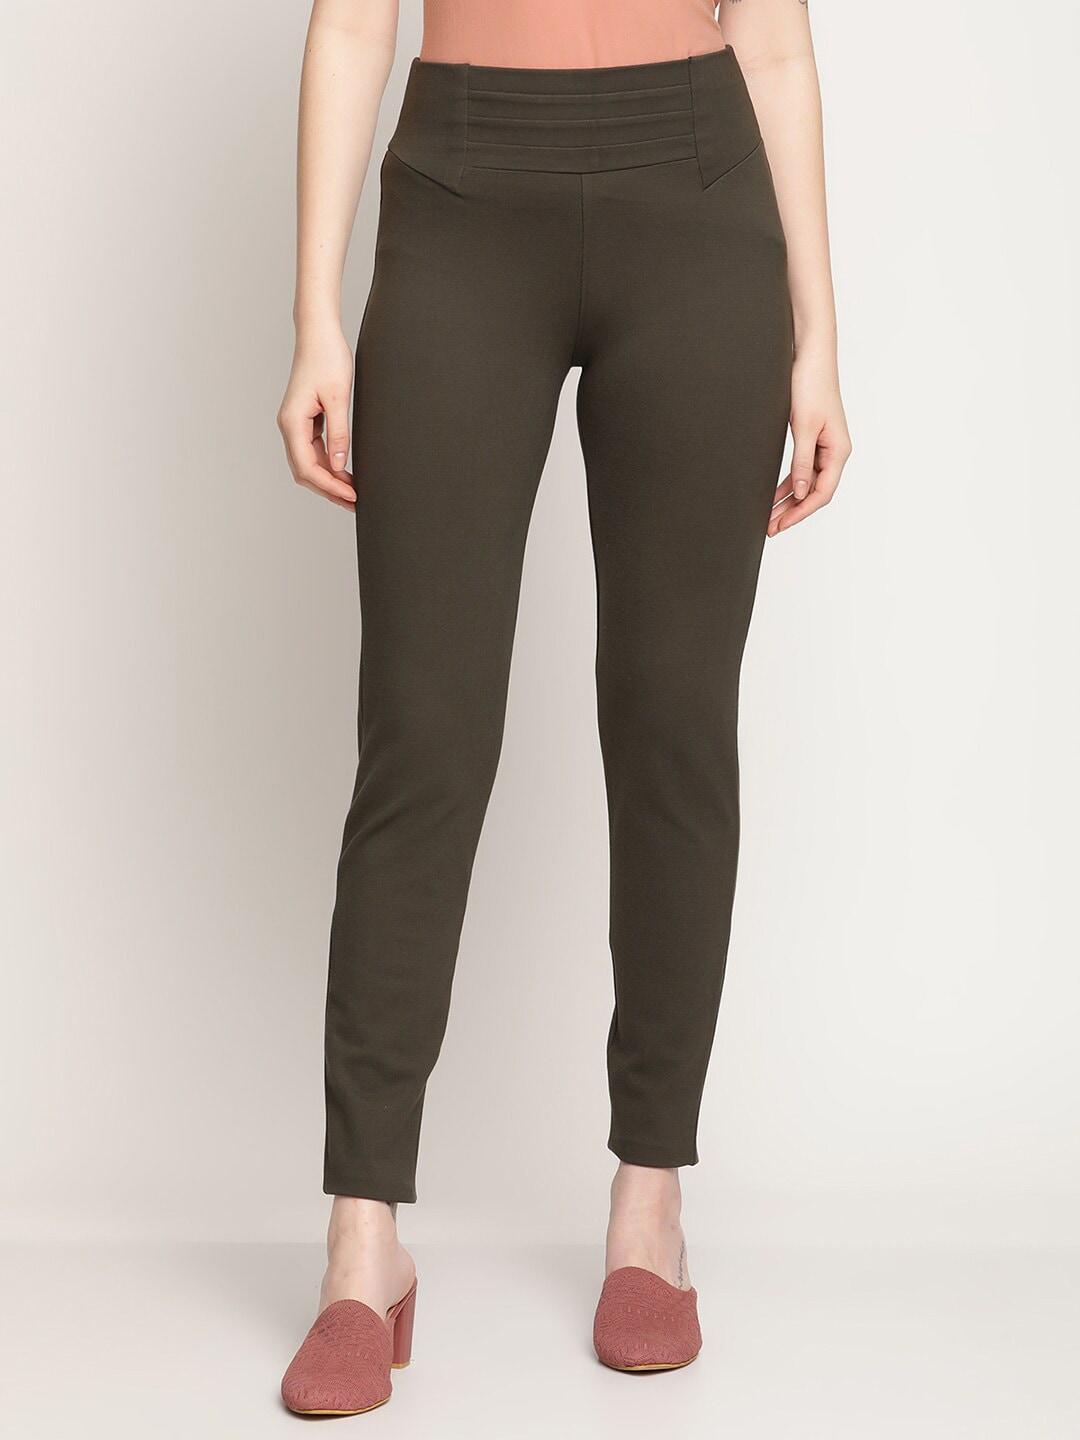 cantabil-women-olive-solid-cotton-jeggings